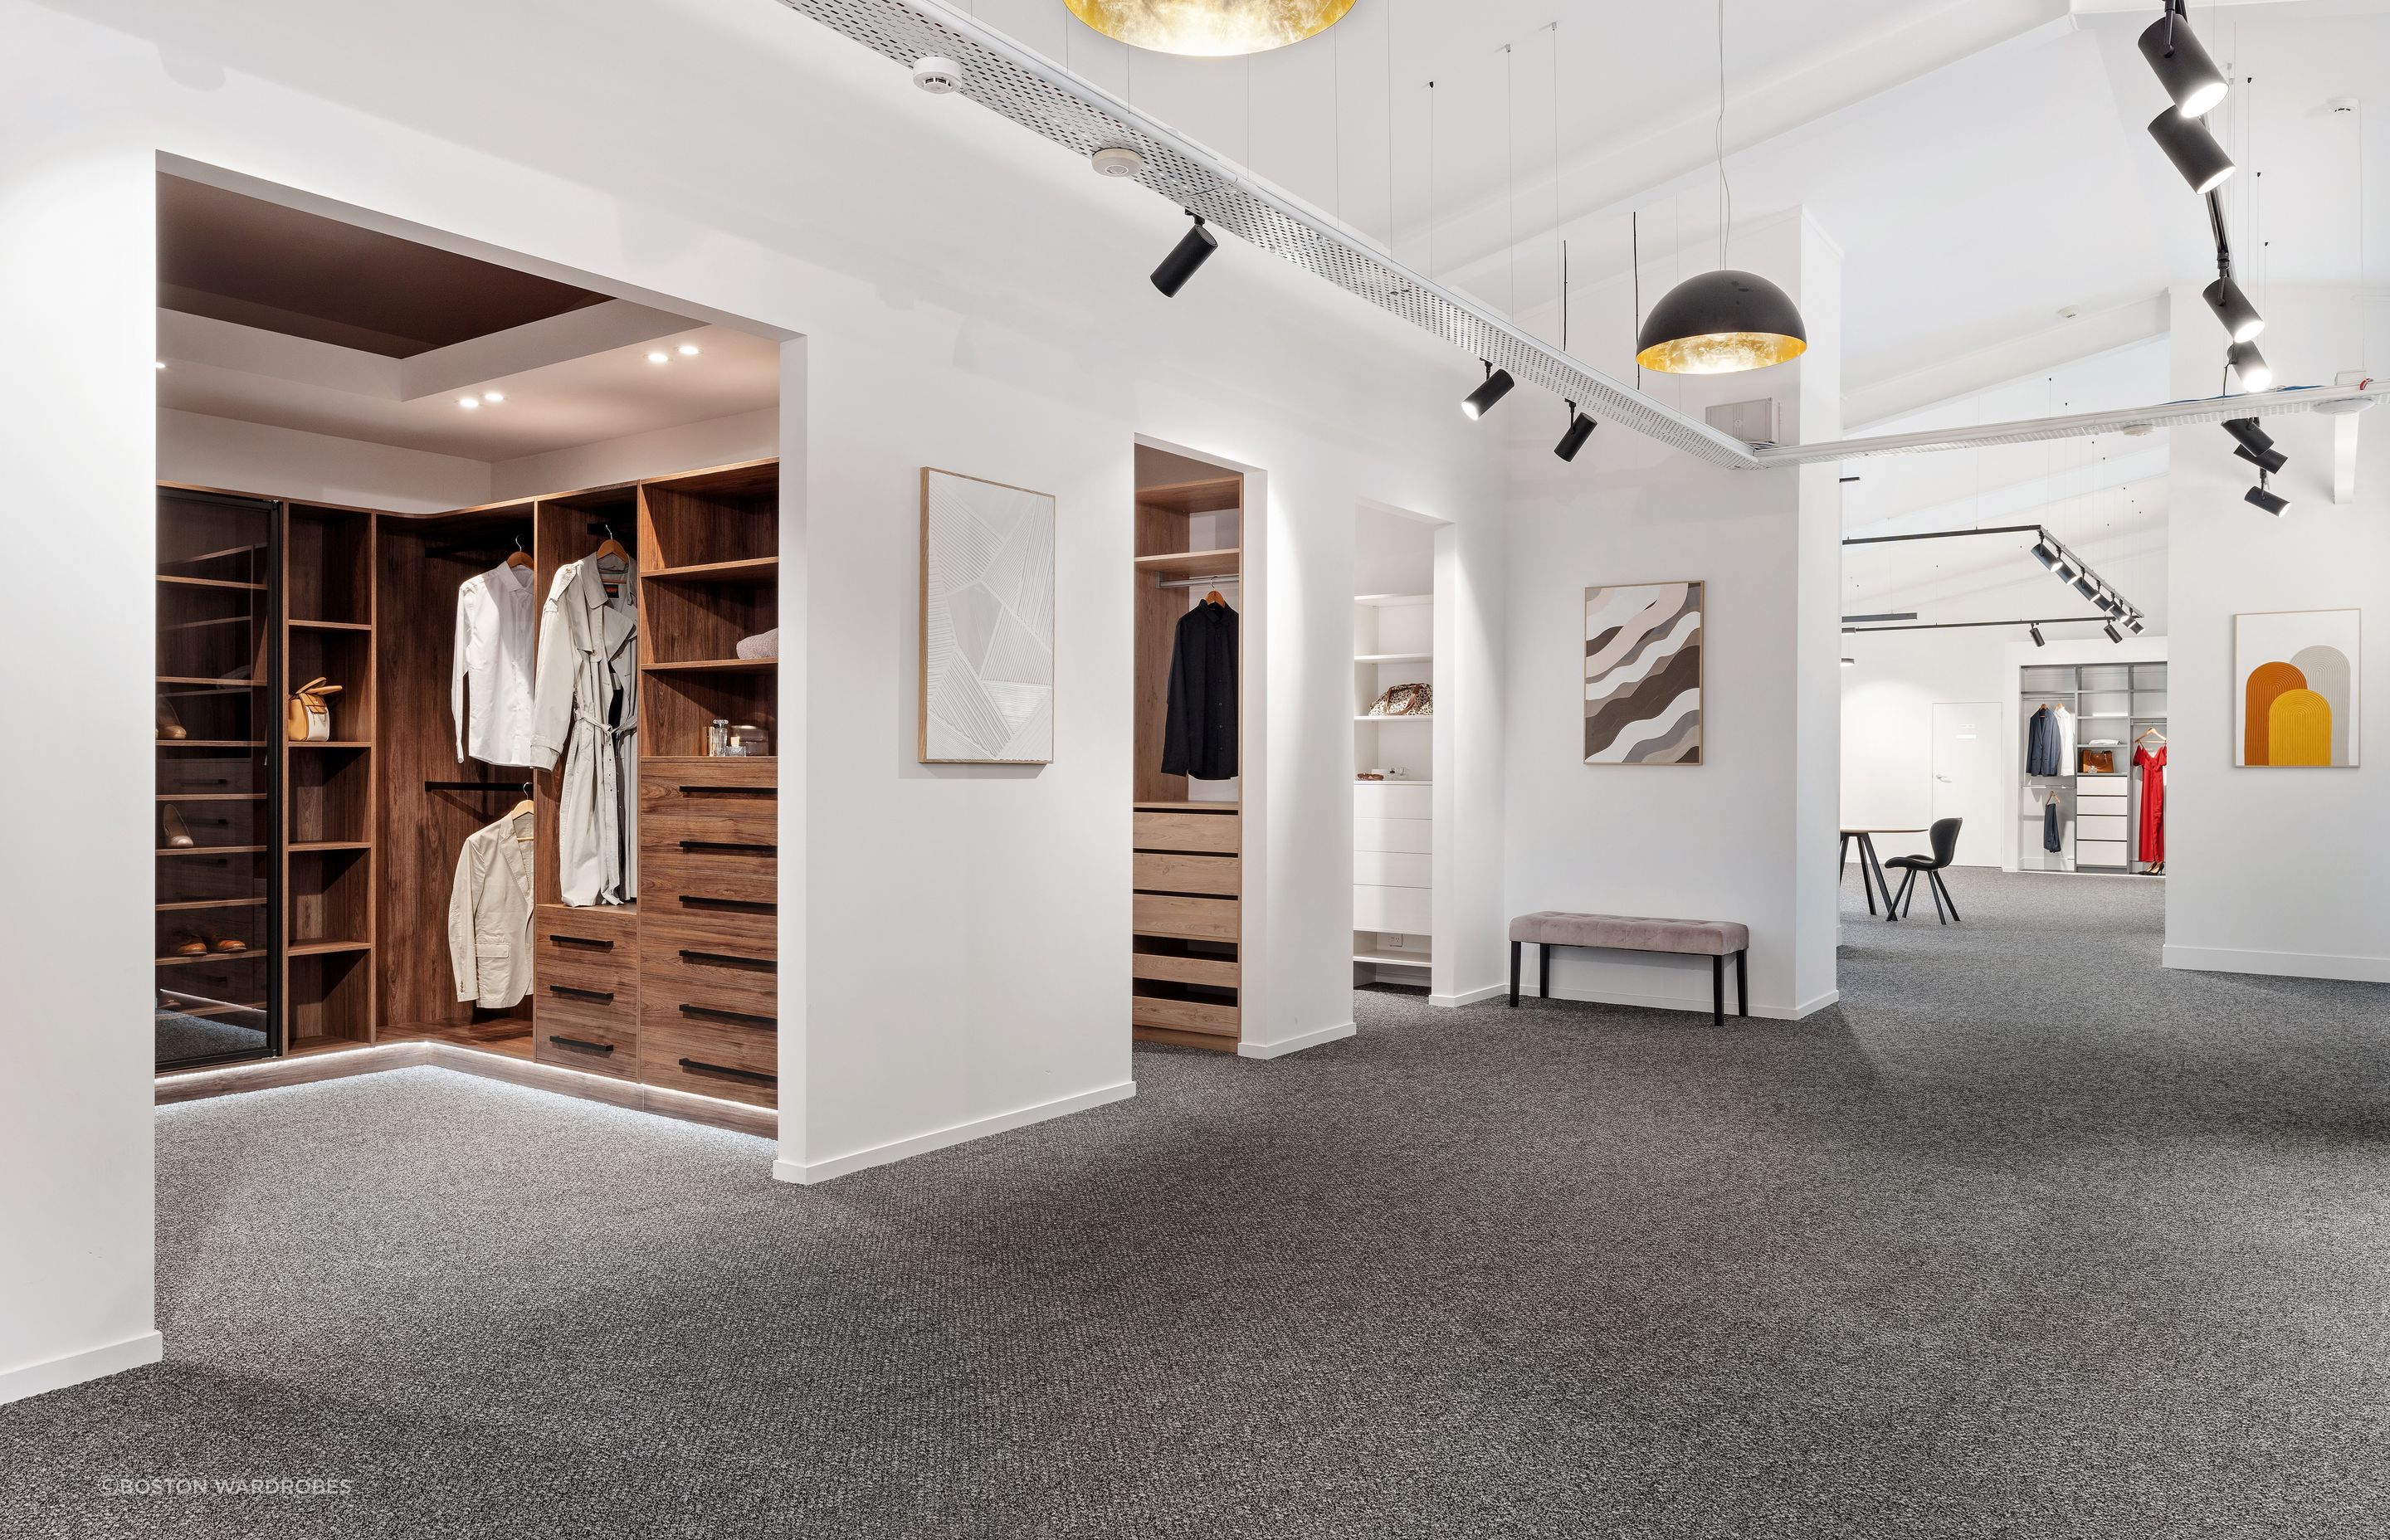 Boston Wardrobes’ showroom in Auckland allows you to visualise your new storage solution.